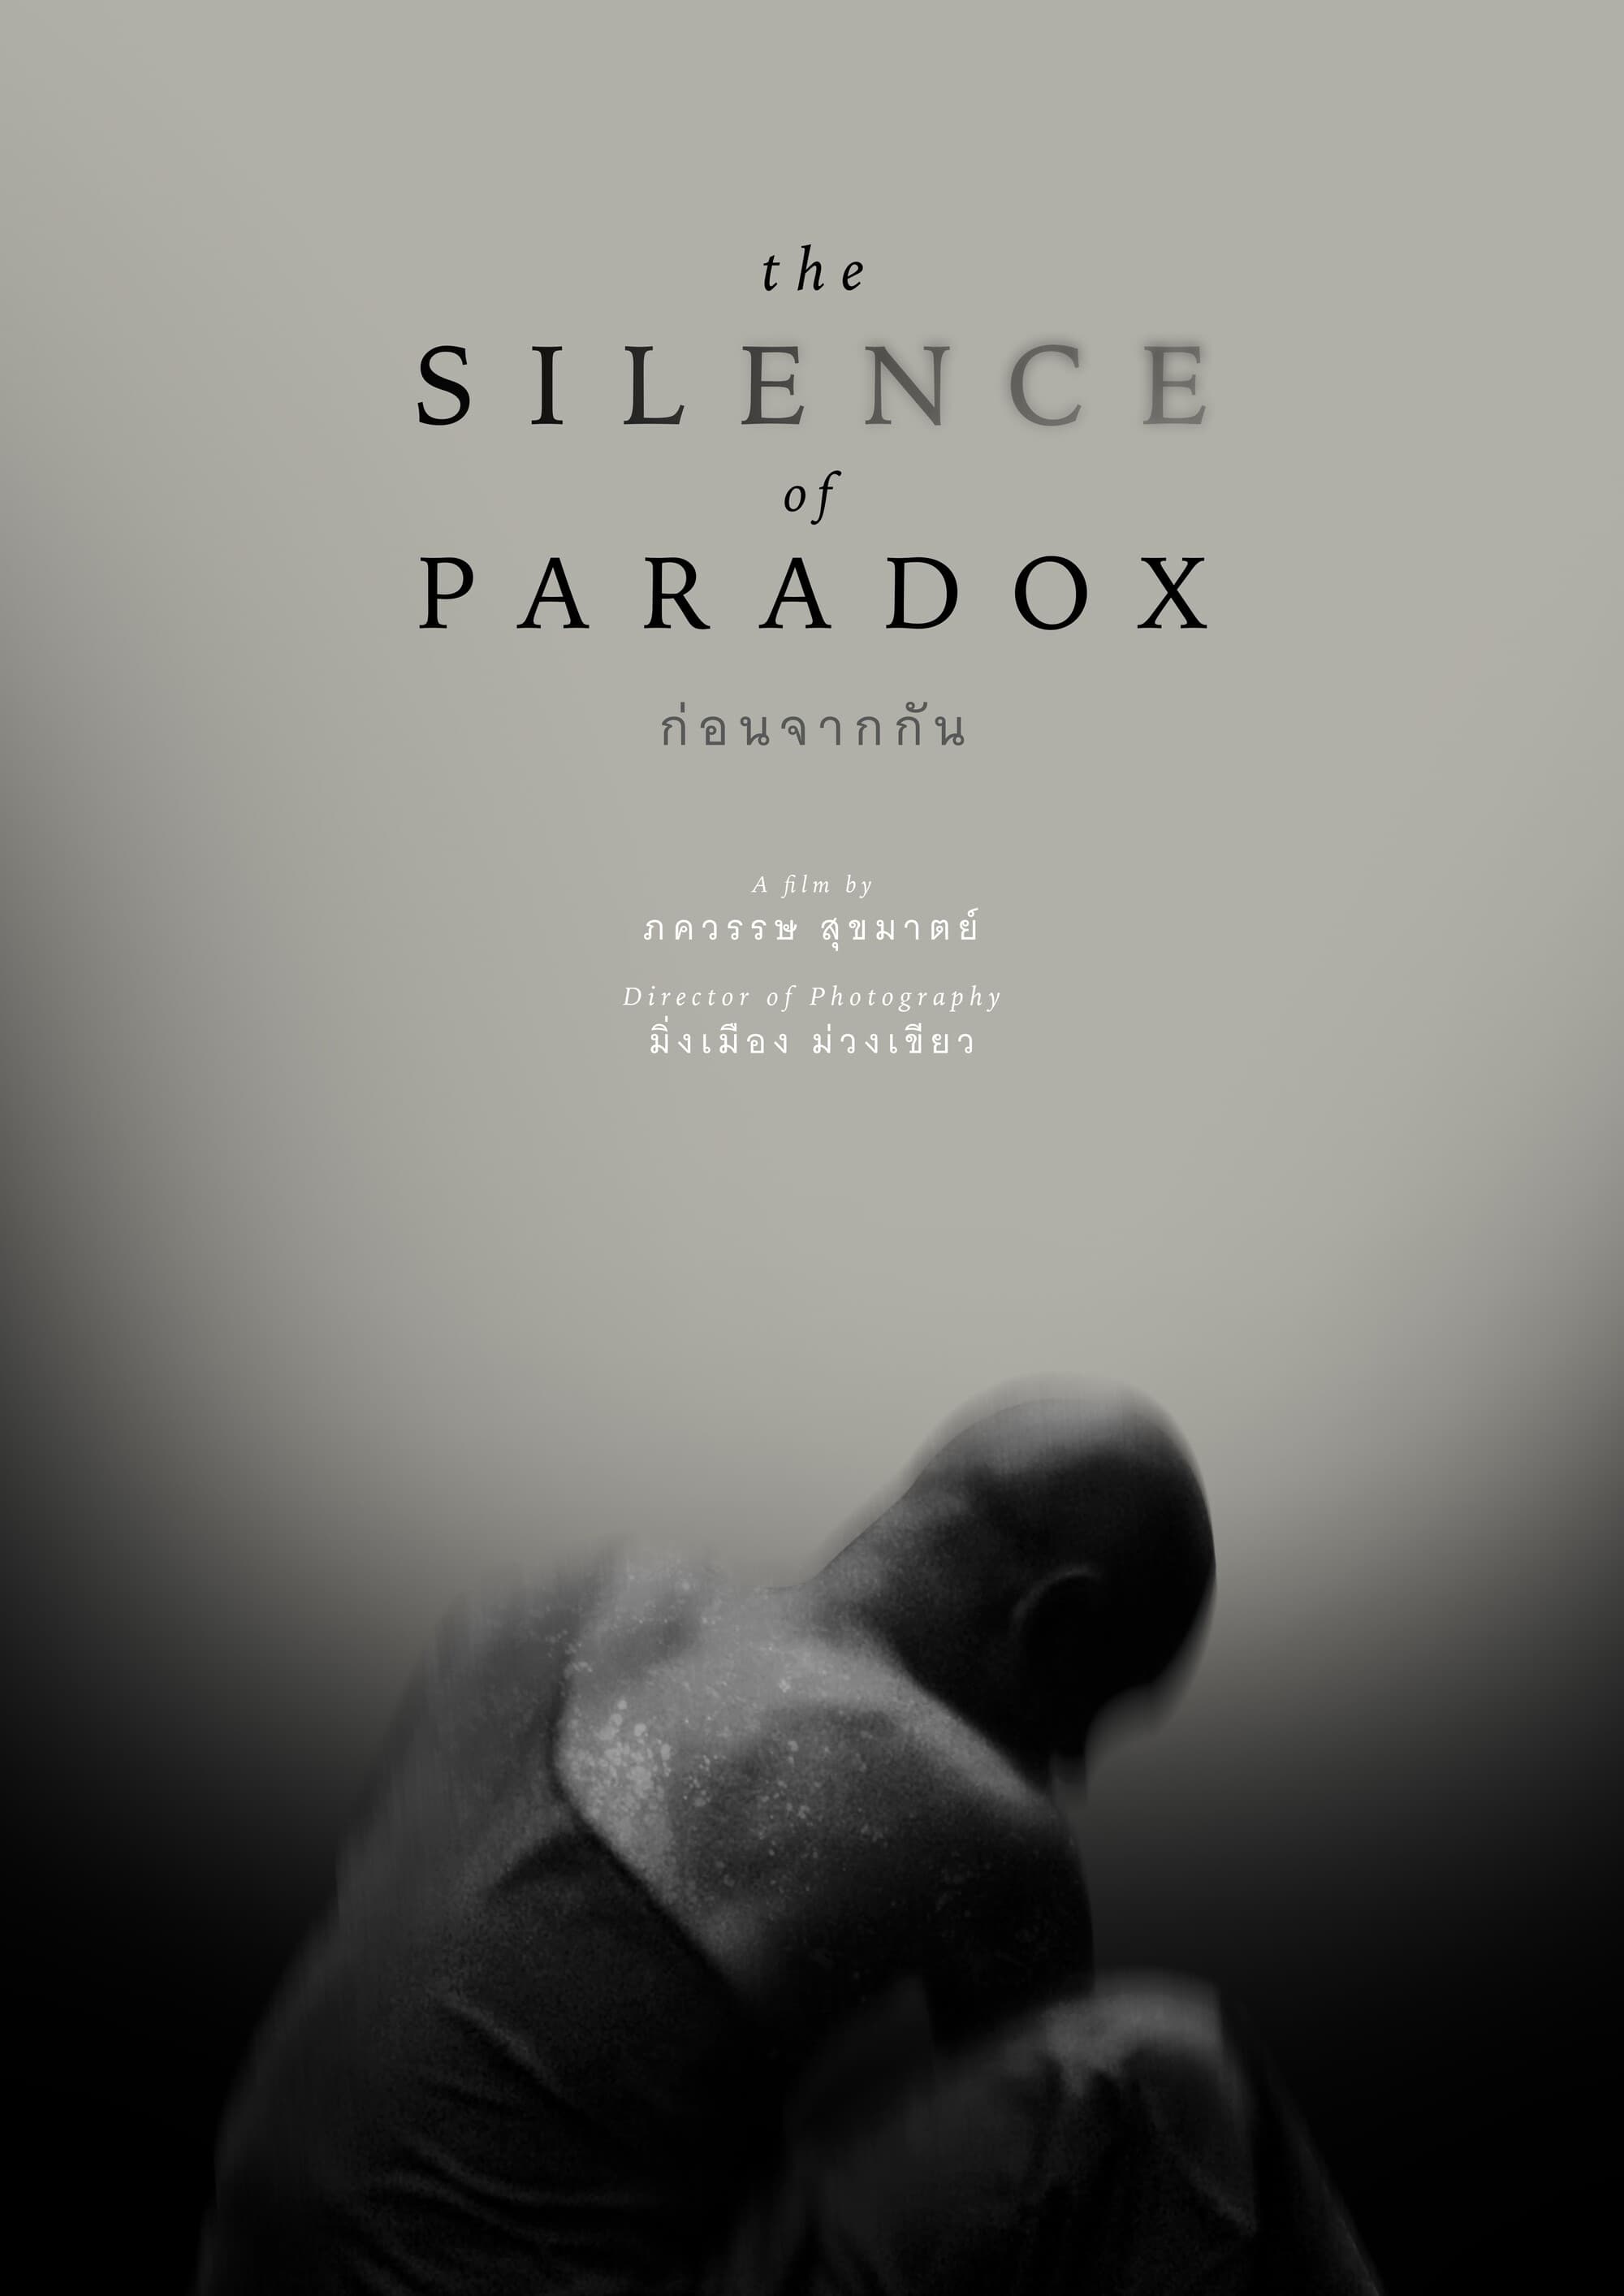 The Silence of Paradox